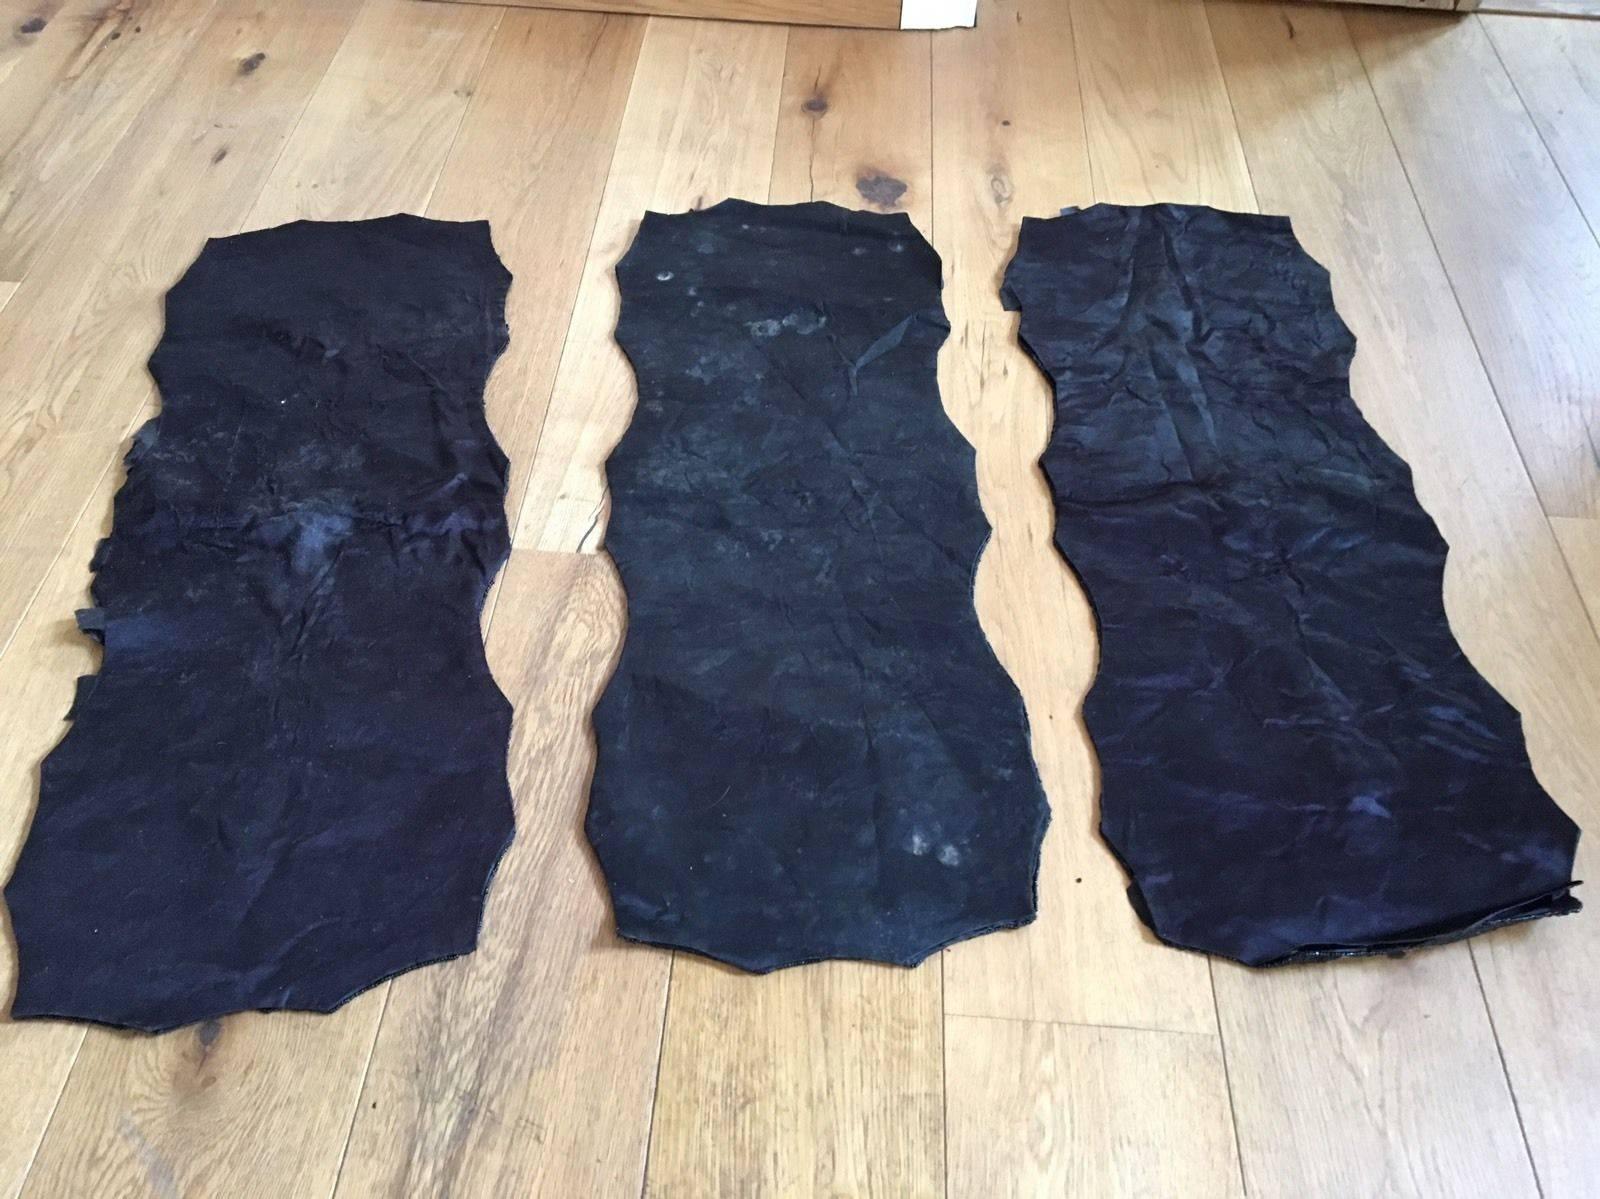 Superb 1920s hand beaded panels. Possibly for garments or pelmets? Backed with black satin silk and has inner white possibly a paper or stiff linen section, then the hand beaded extremely heavy top layer in hold and black beads on what feels like a